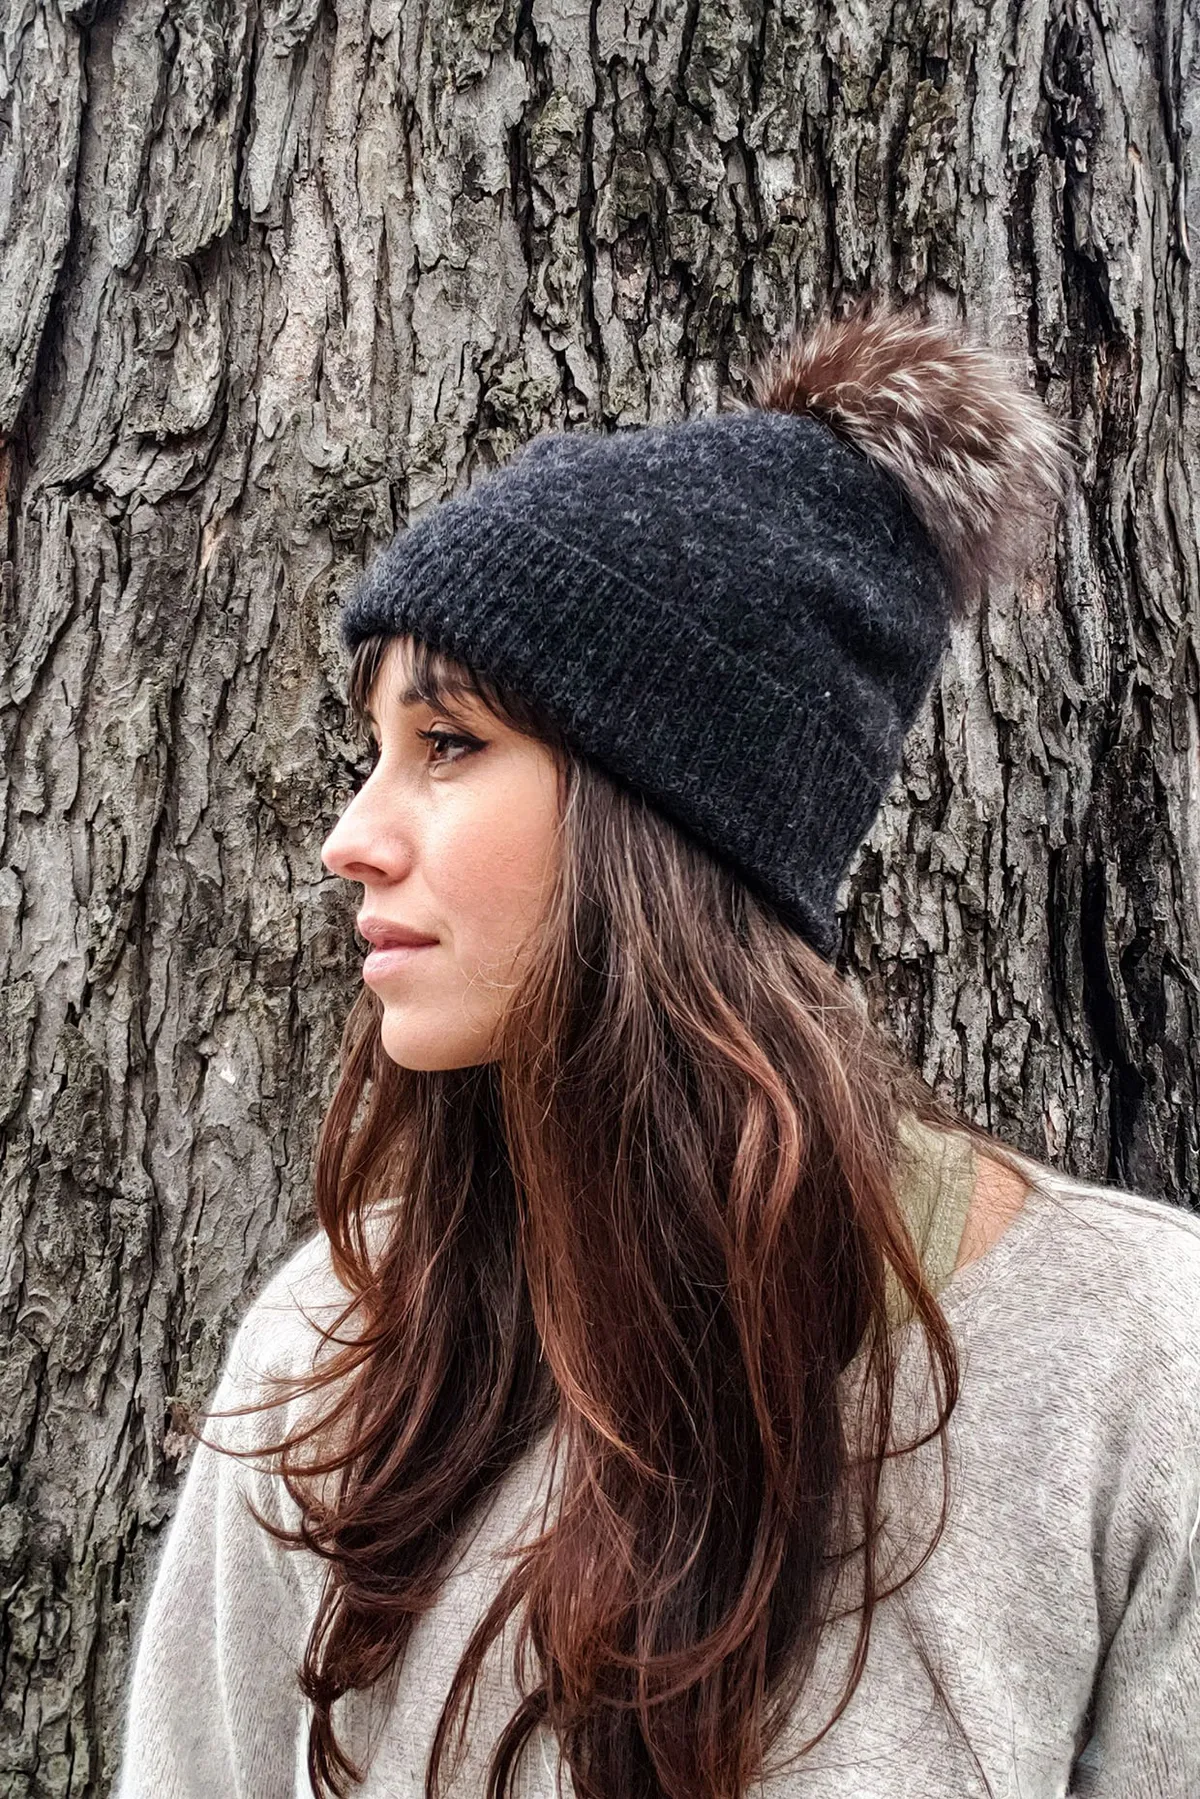 Hat sewing patterns – Atlas Tuque hat